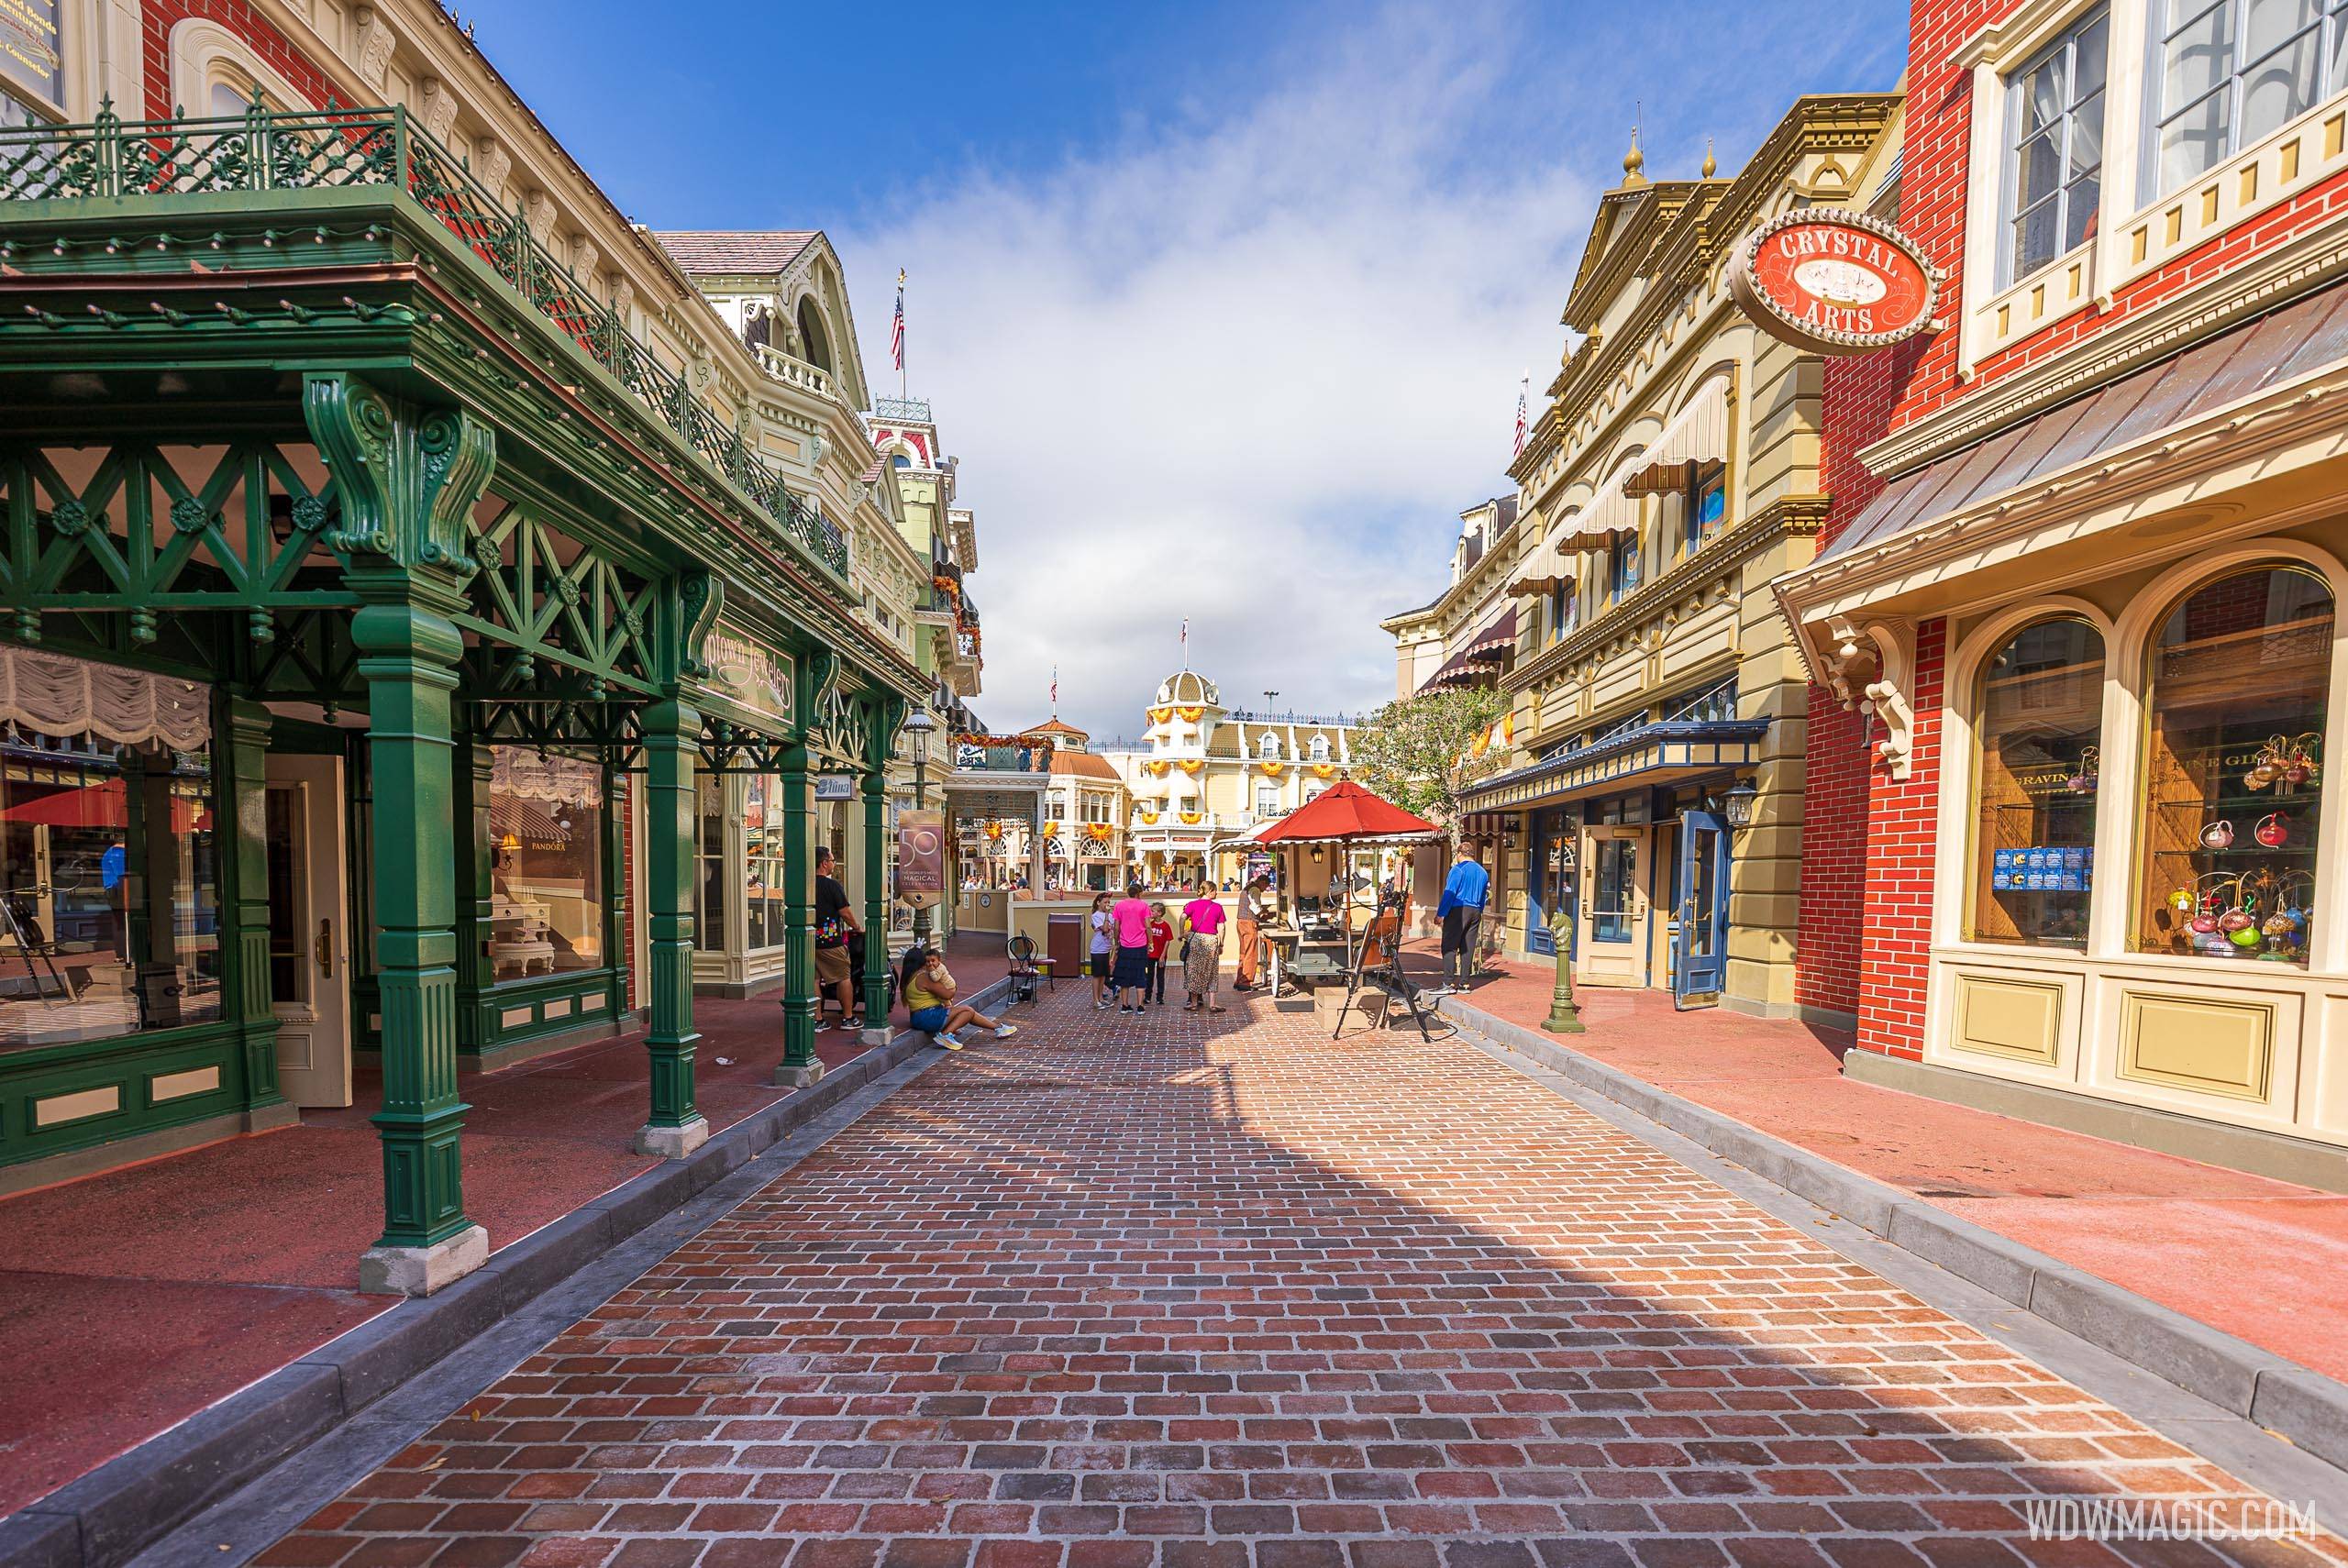 More of Center Street on Main Street U.S.A. in Magic Kingdom reopens to guests